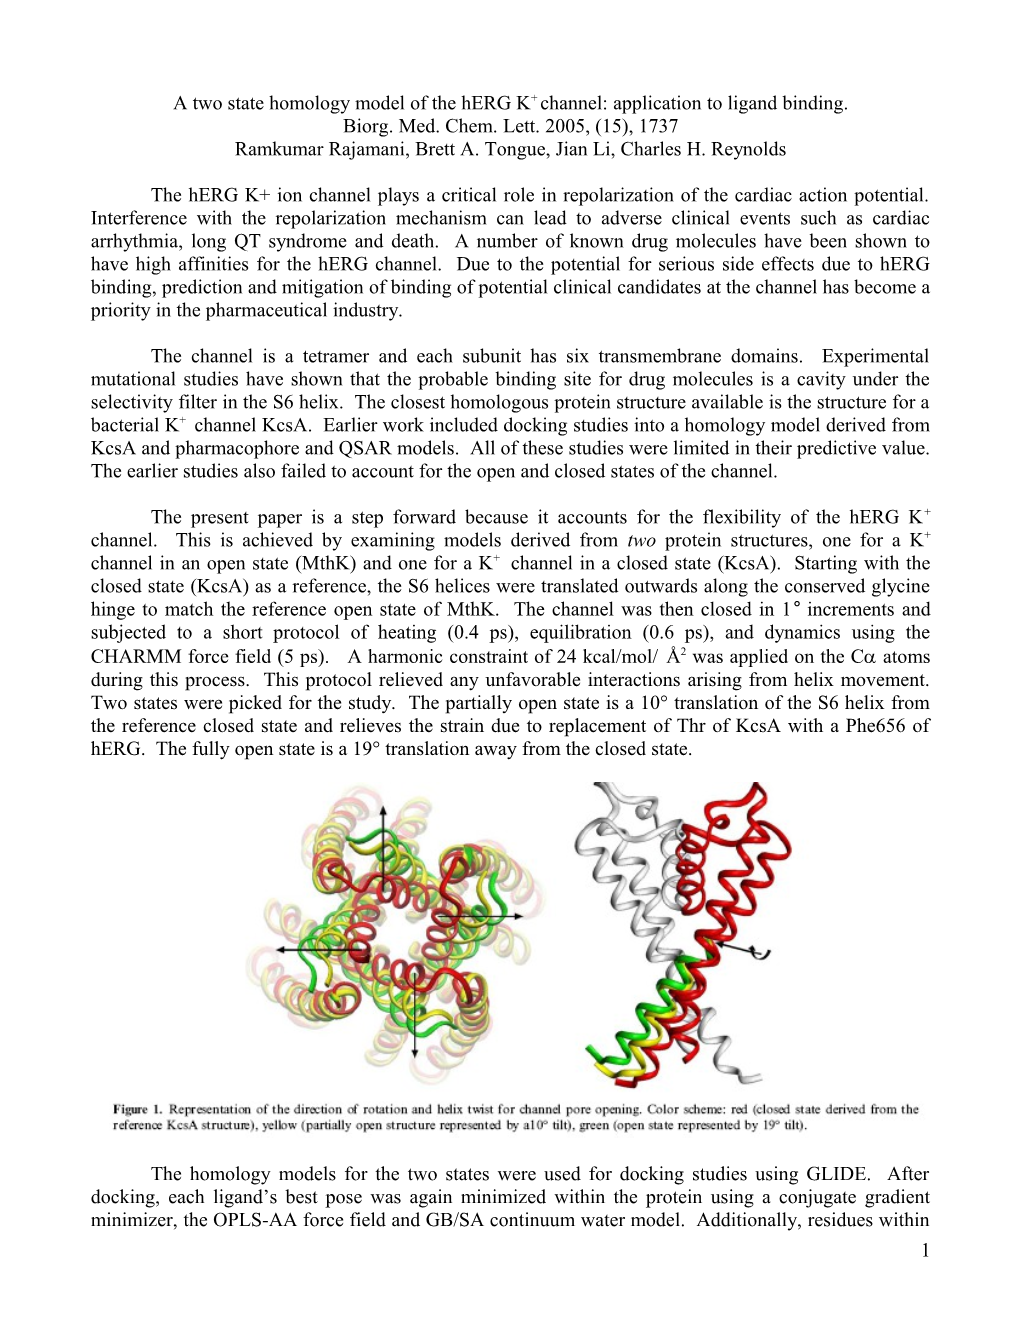 A Two State Homology Model of the Herg K+ Channel: Application to Ligand Binding